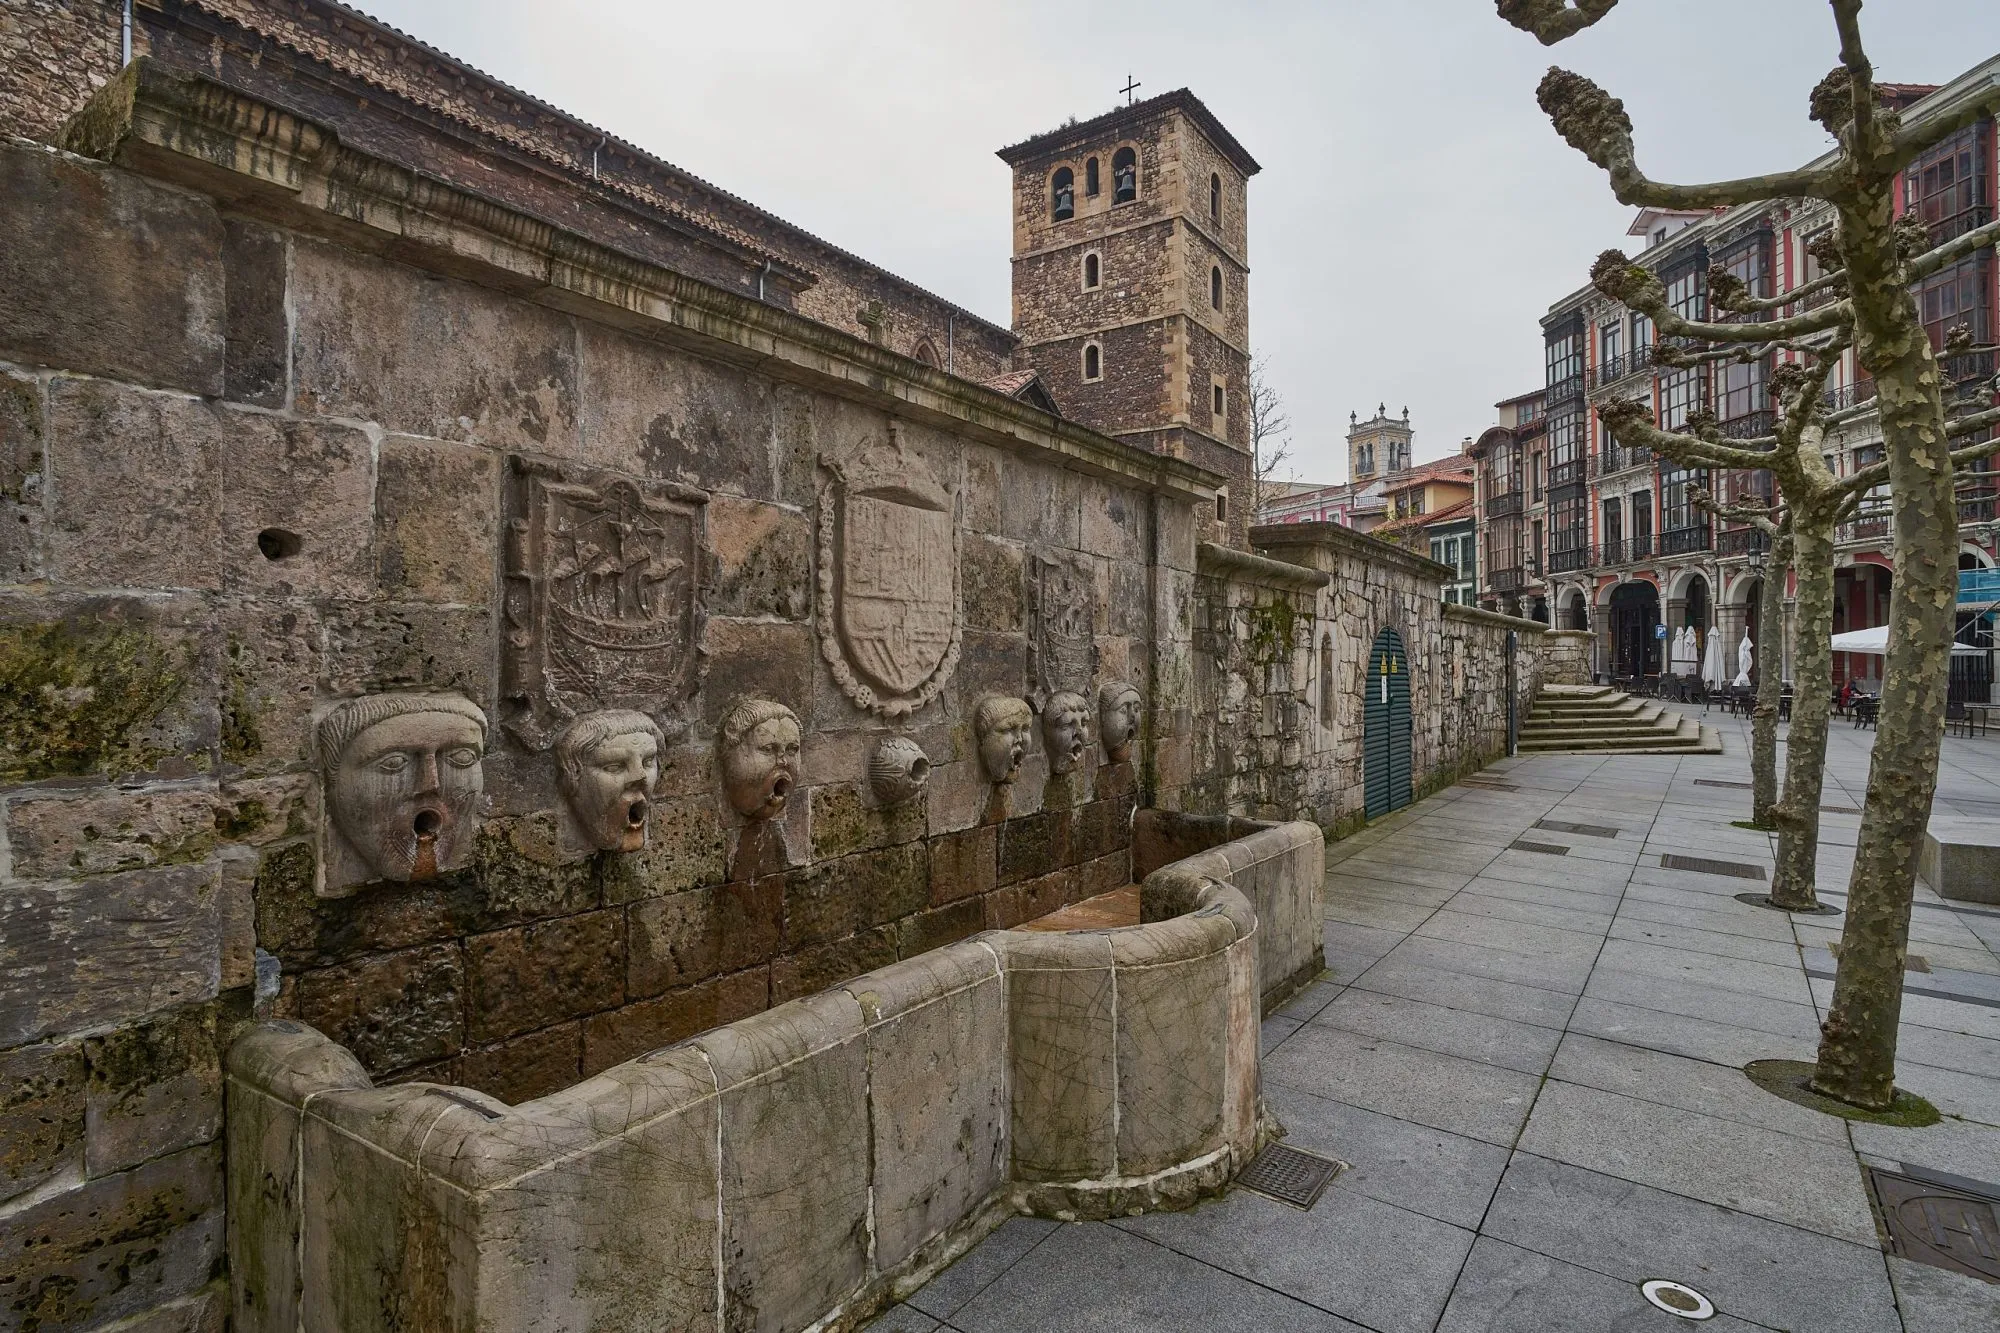 Fuente de los Caños de San Francisco, located in the Asturian town of Avilés. Located next to the Palace of Ferrera and the church of San Nicolás de Bari. It is a civil work of the seventeenth century